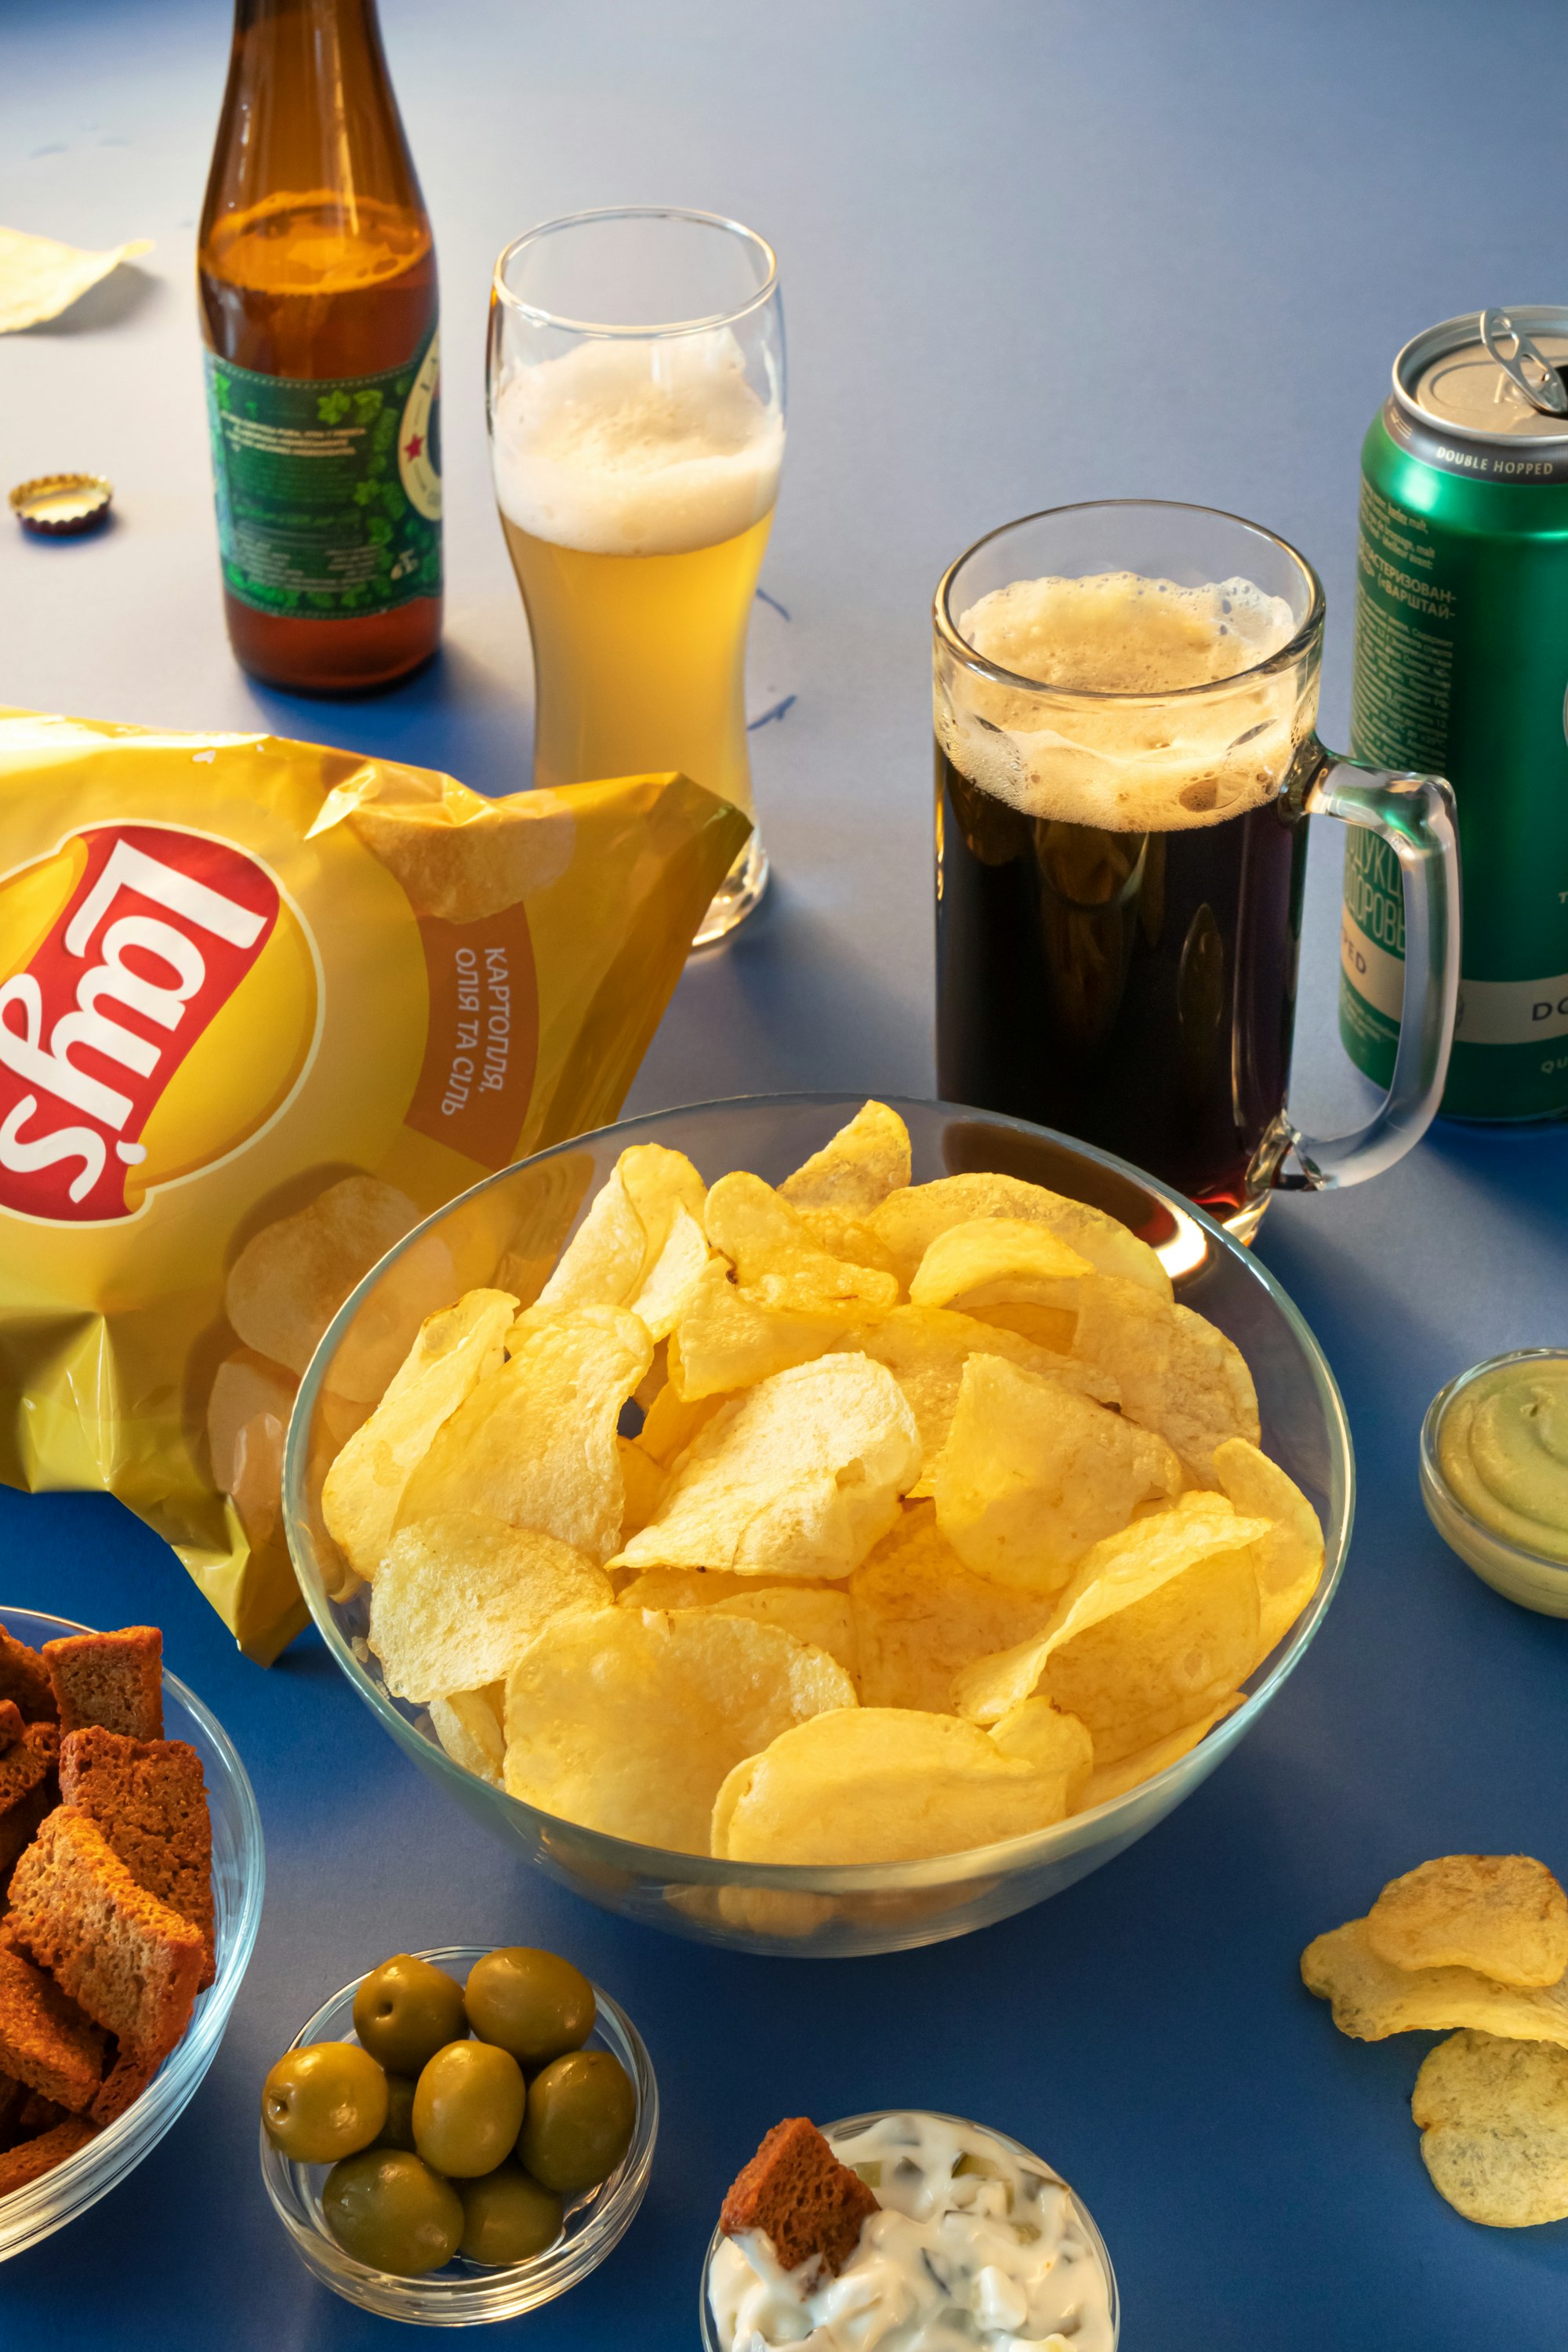 Potato chips with beer, snacks and sauces on blue background